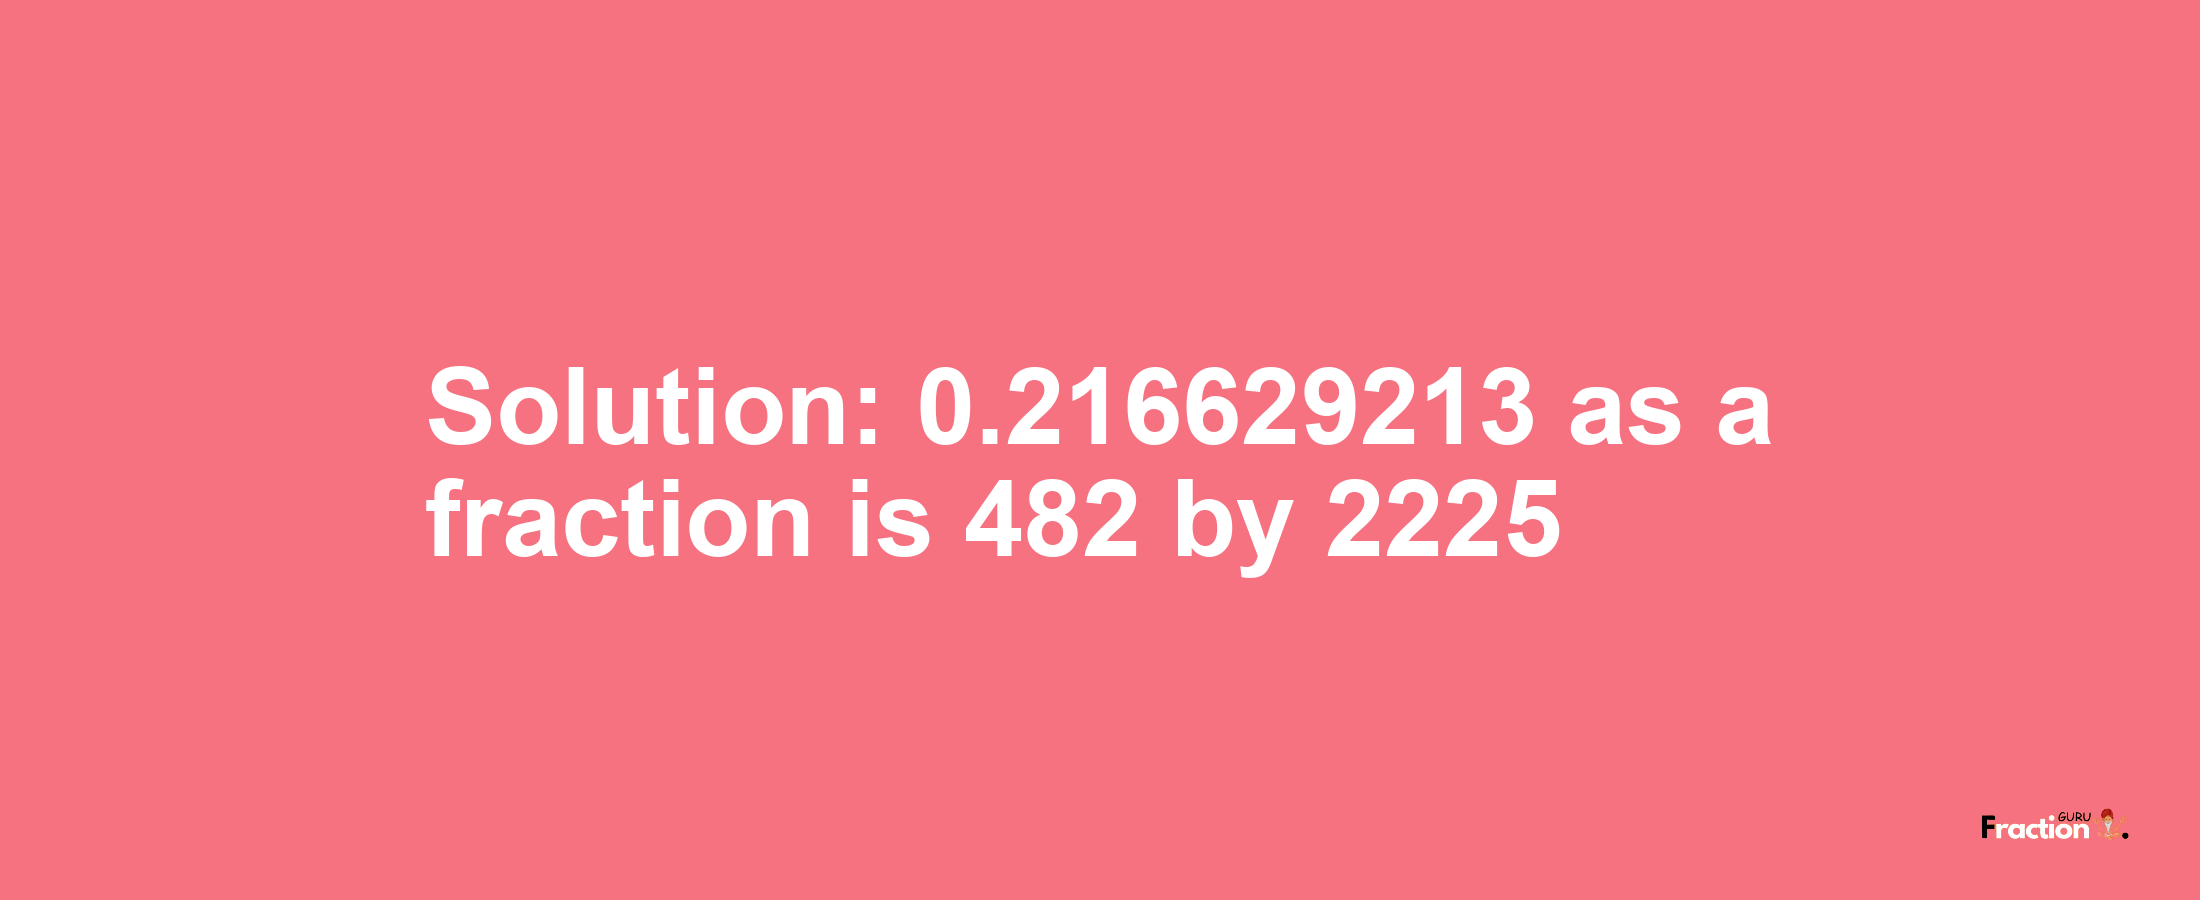 Solution:0.216629213 as a fraction is 482/2225